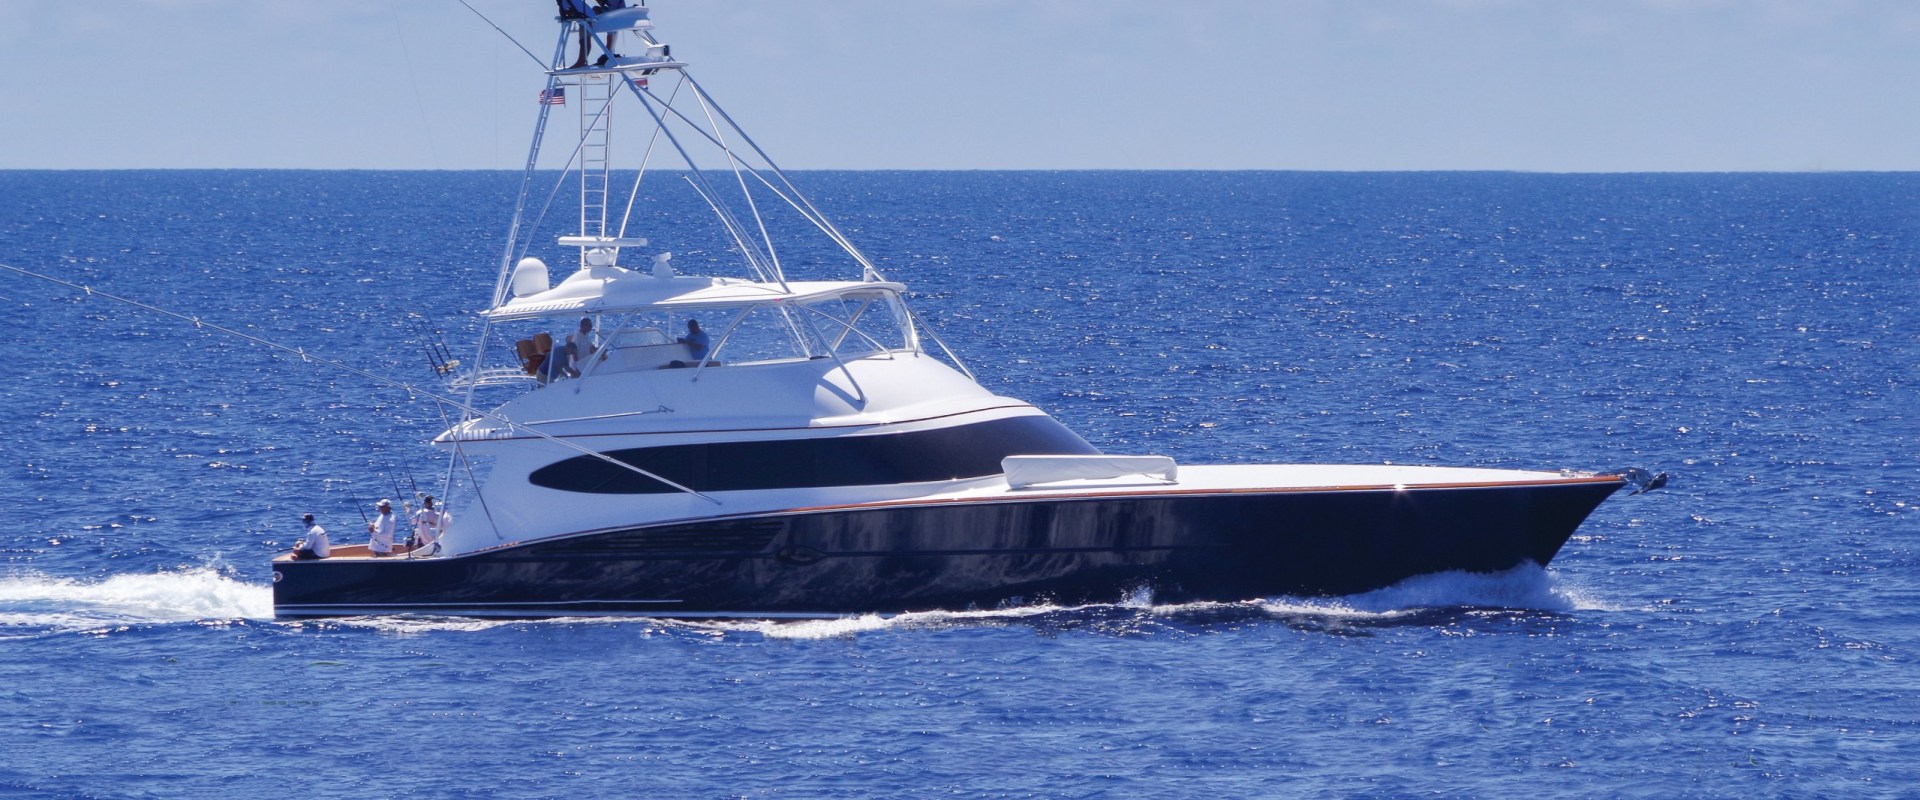 Is owning a charter boat profitable?